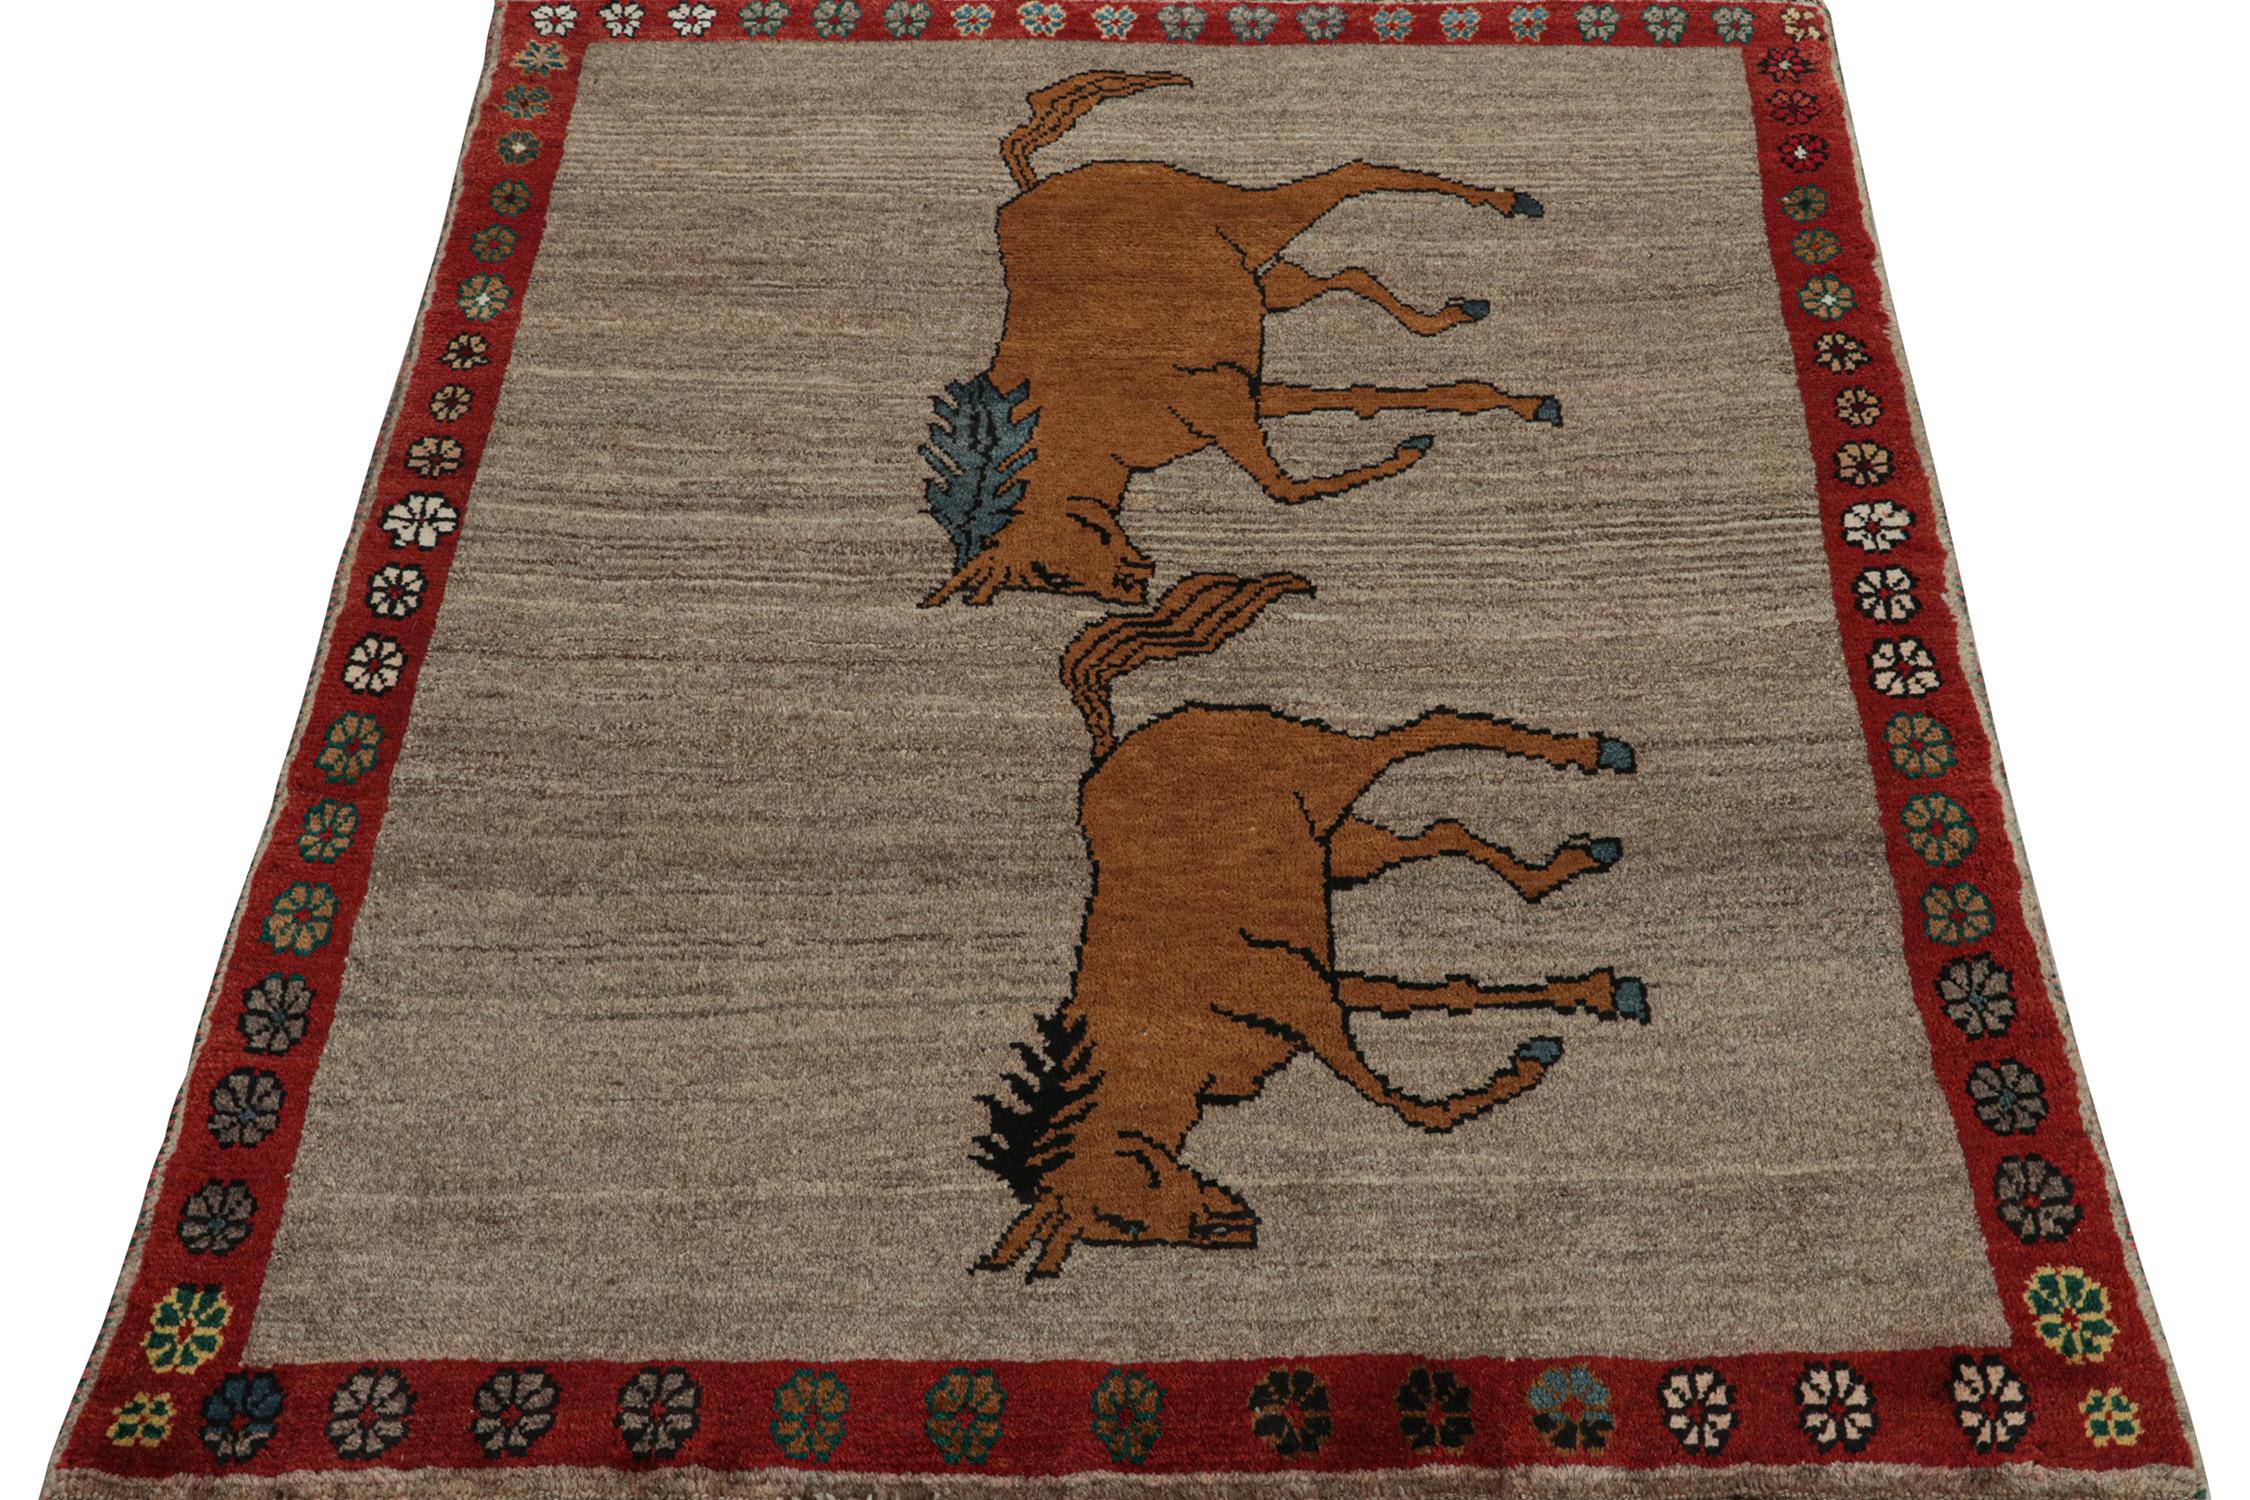 Turkish Vintage Gabbeh Tribal Rug in Gray & Brown Horse Pictorial Patterns by Rug Kilim For Sale